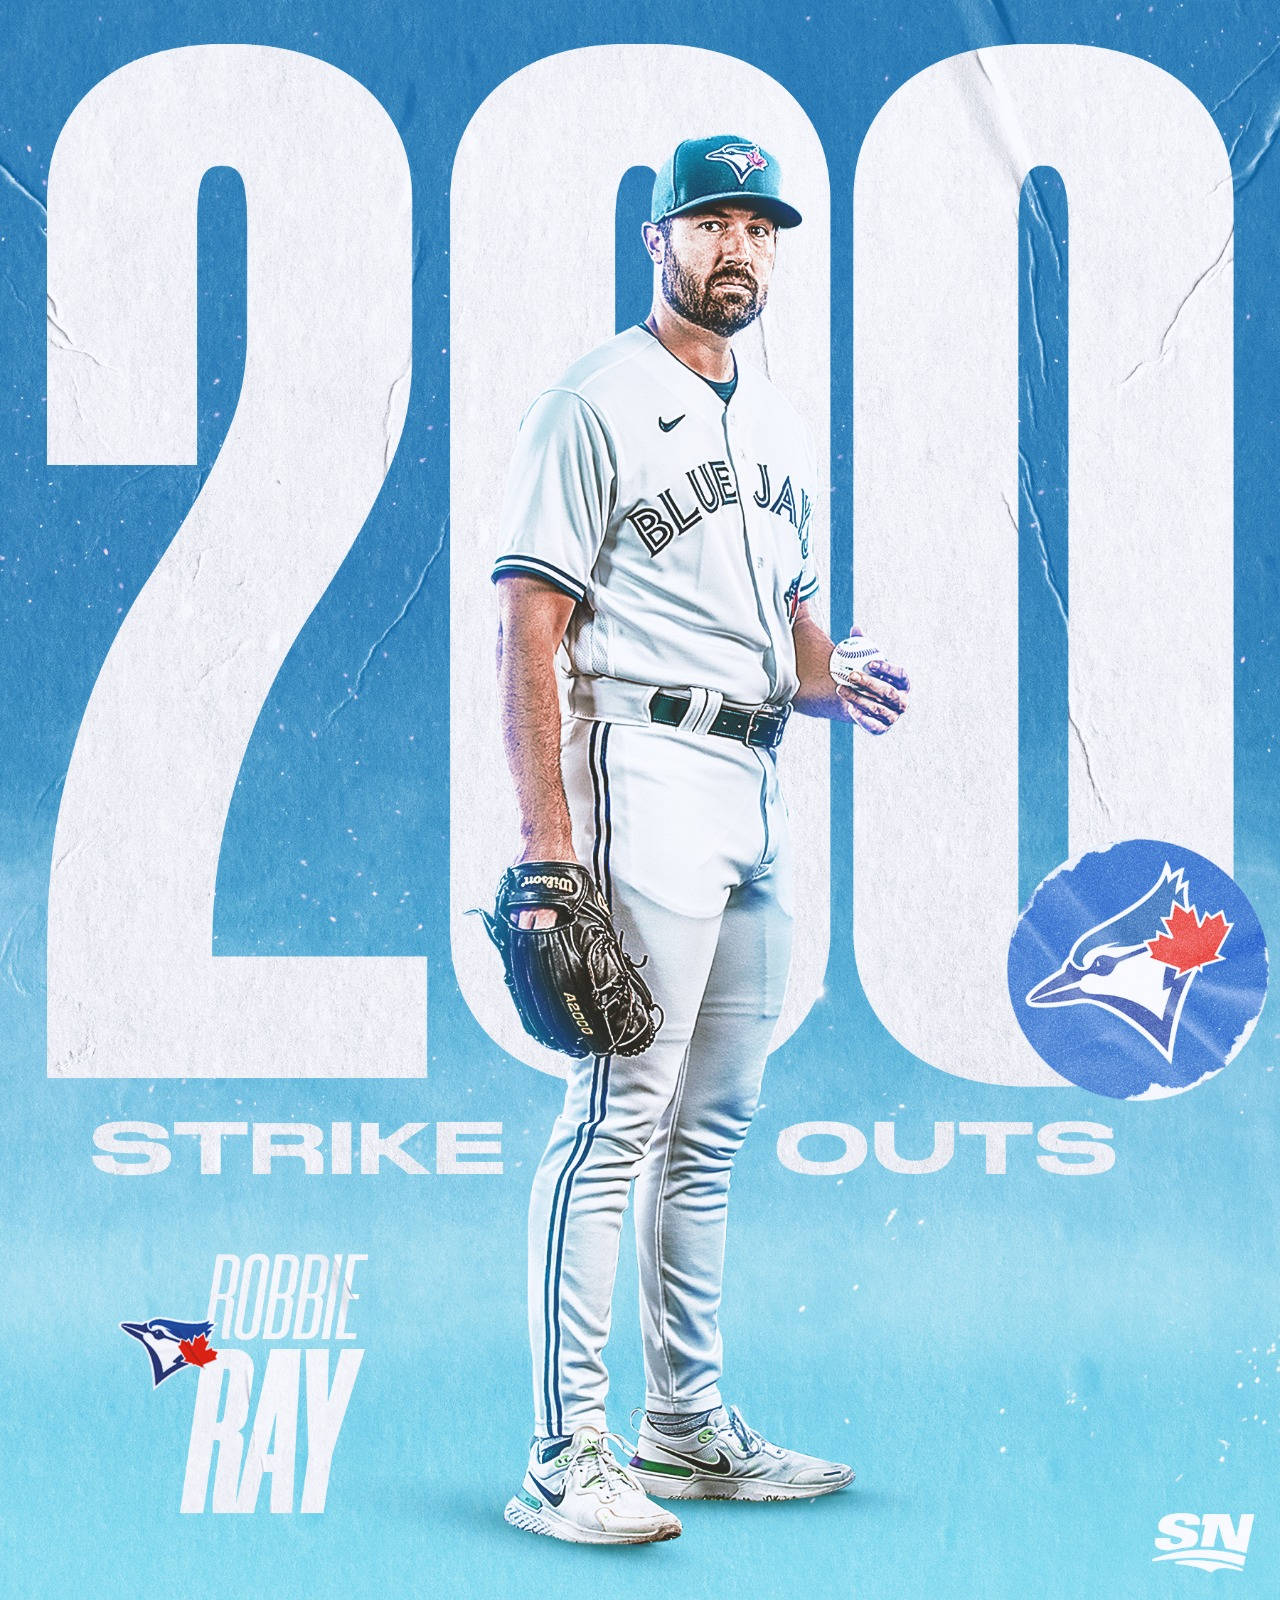 Robbieray 200 Strikeouts Poster: Robbie Ray 200 Strikeouts Poster Wallpaper